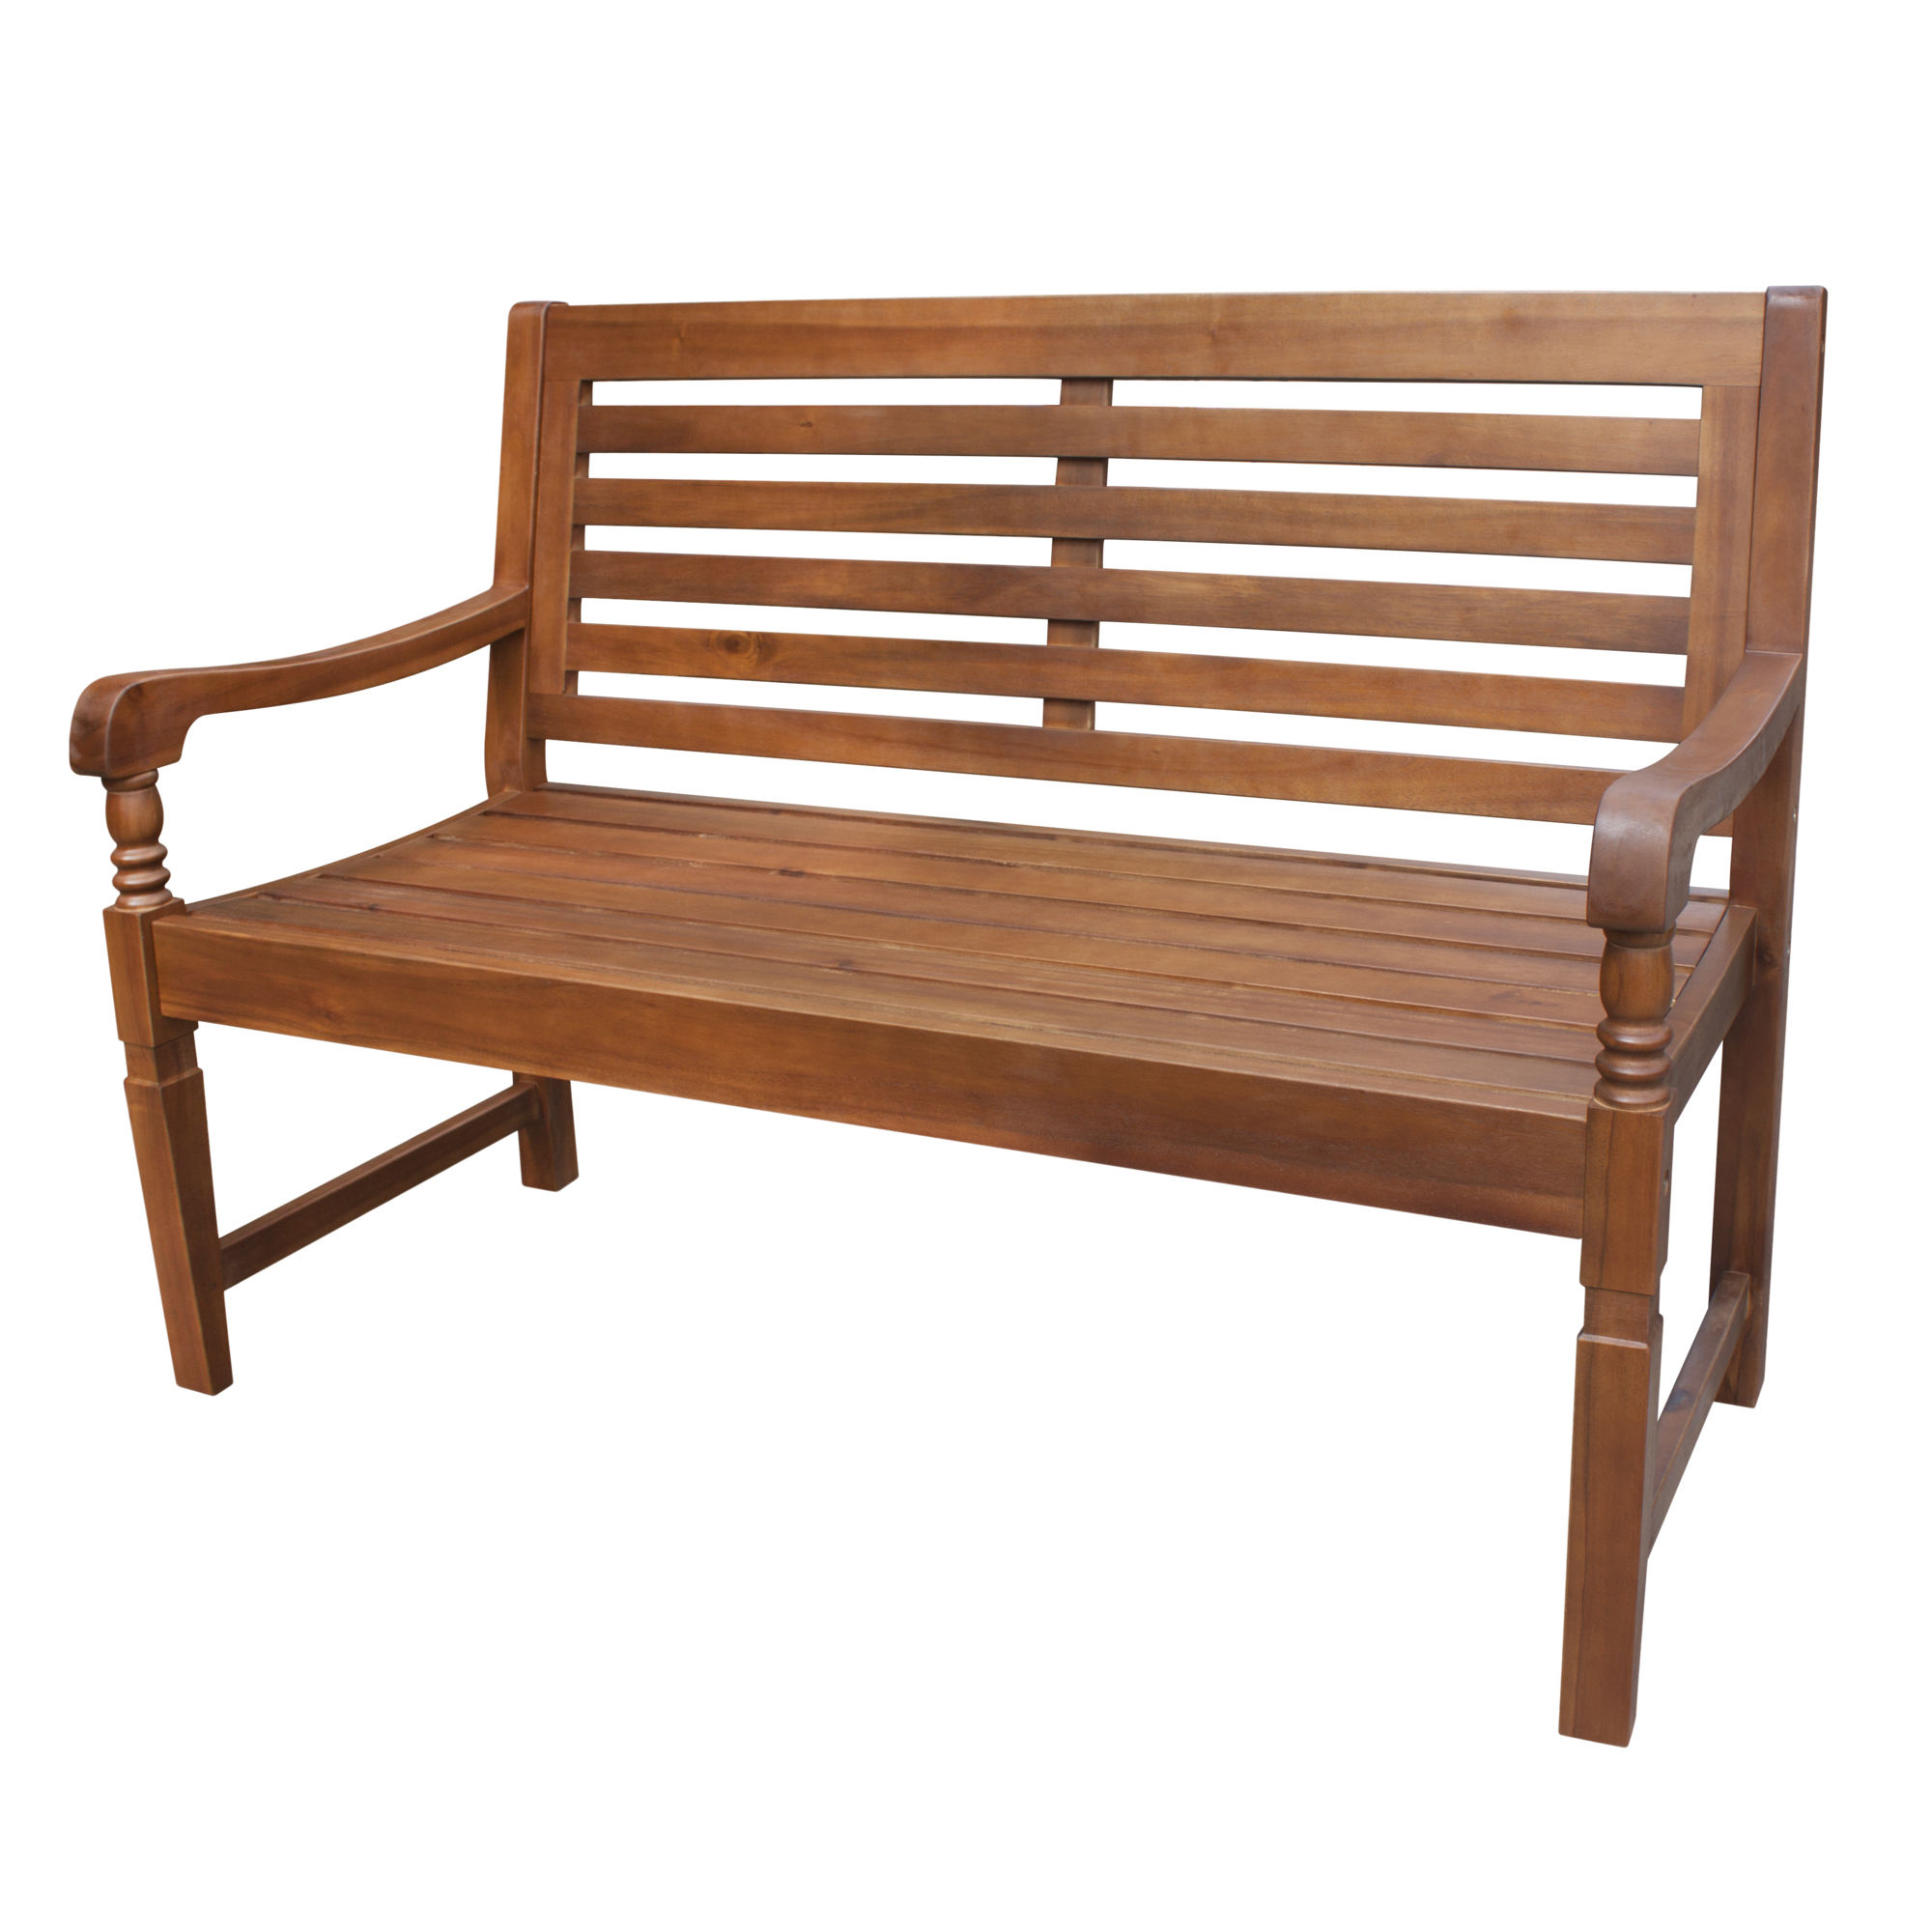 Merry Products, Nantucket Garden Bench, Natural, Primary Color Brown, Material Wood, Width 49.21 in, Model BCH0350110010